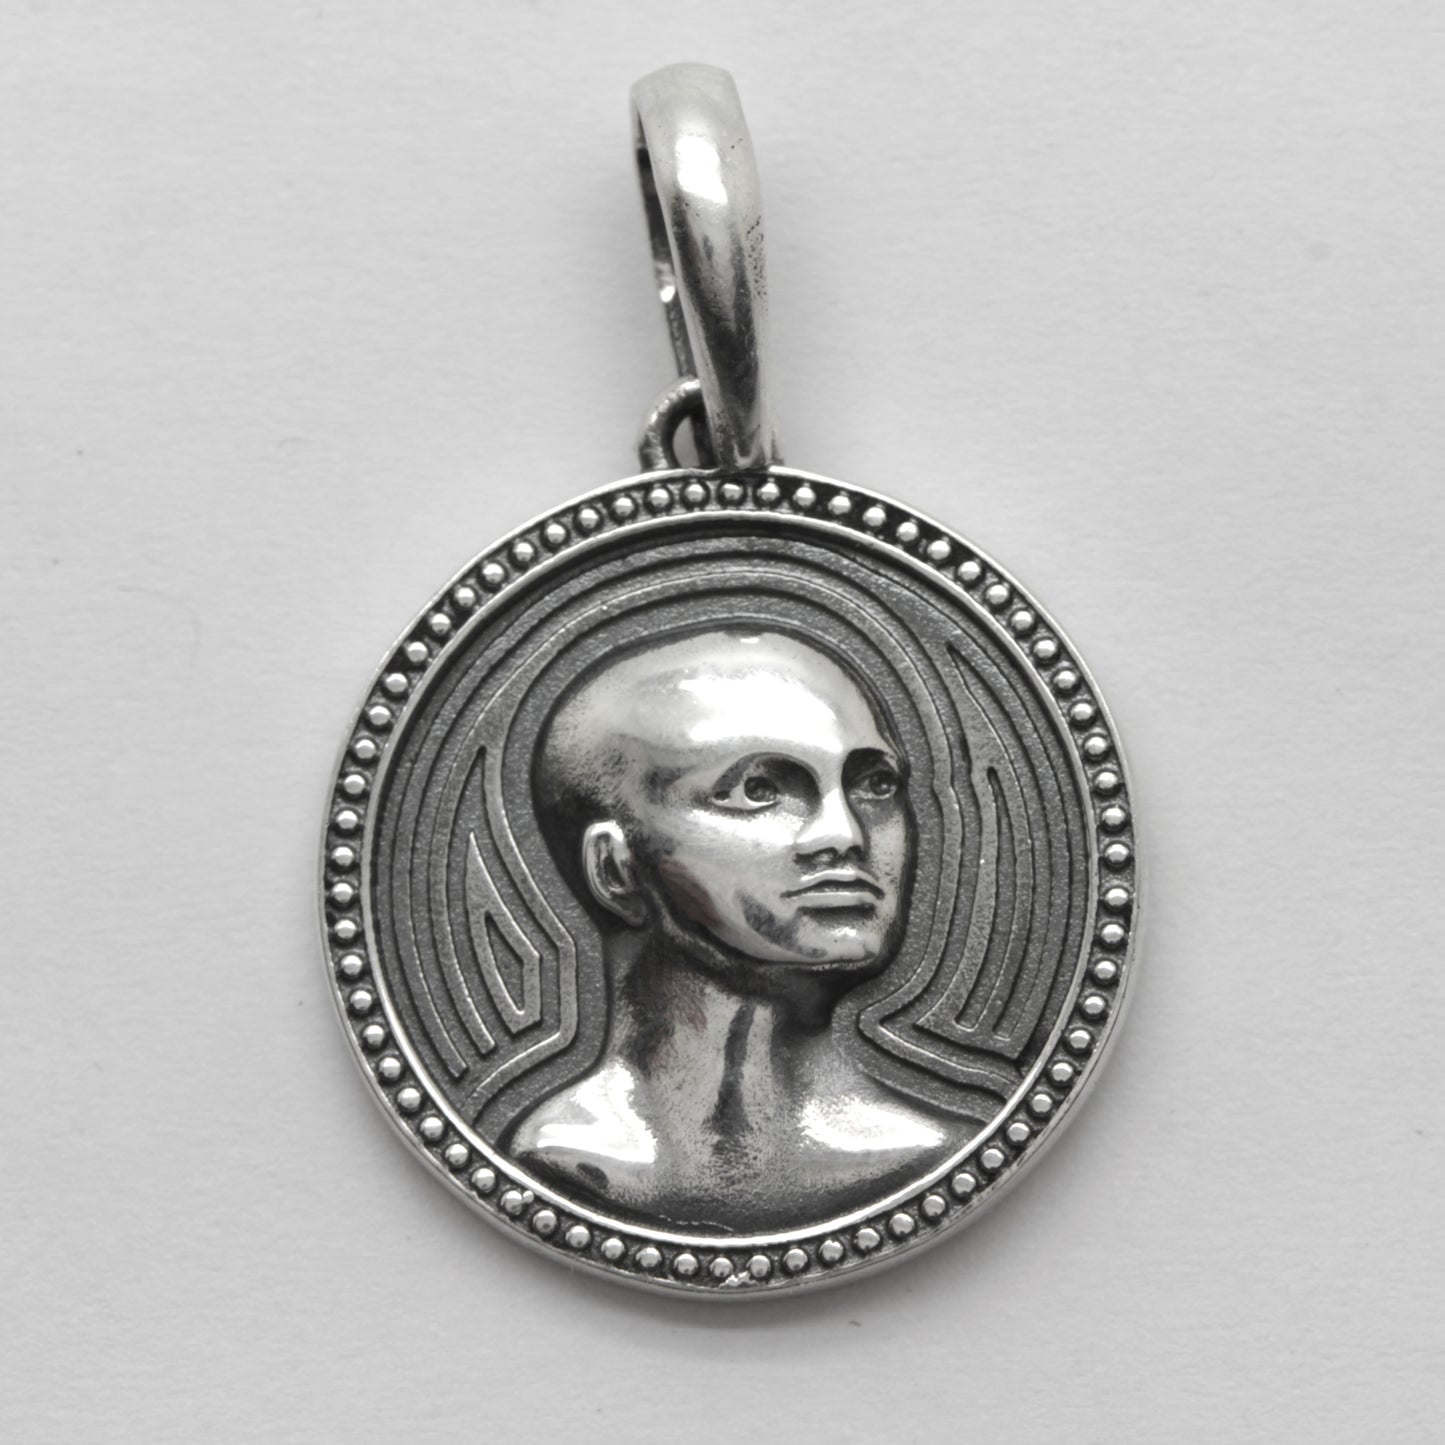 Lord of the World by René Guénon`s Book, Sterling Silver Round Pendant